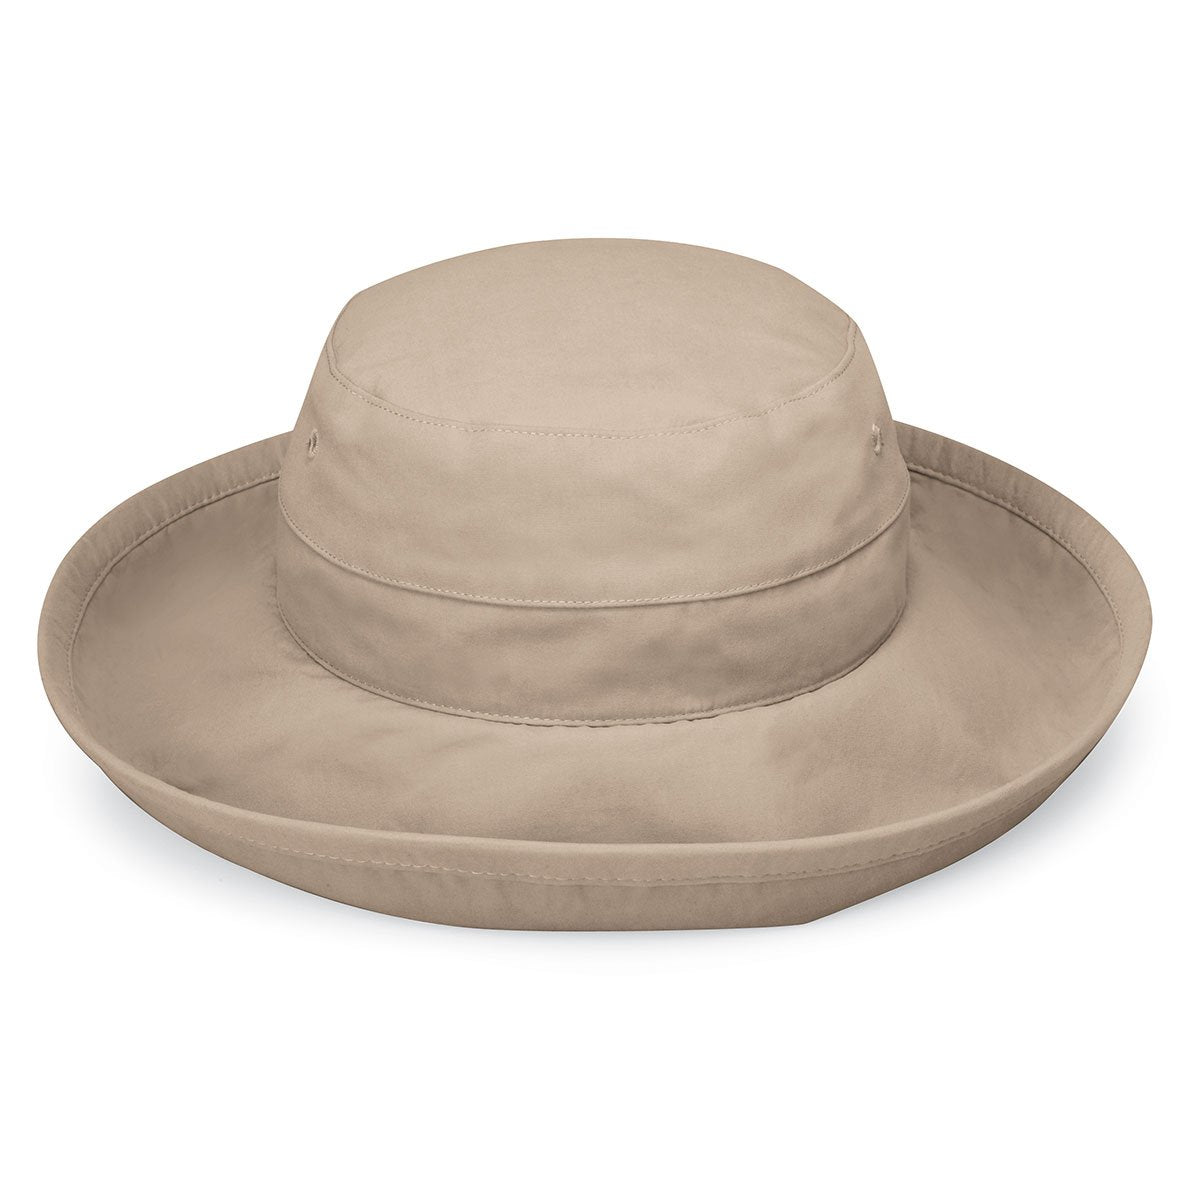 Featuring Casual Traveler Packable UPF Microfiber Wide Brim Crown Style Sun Hat in Camel from Wallaroo